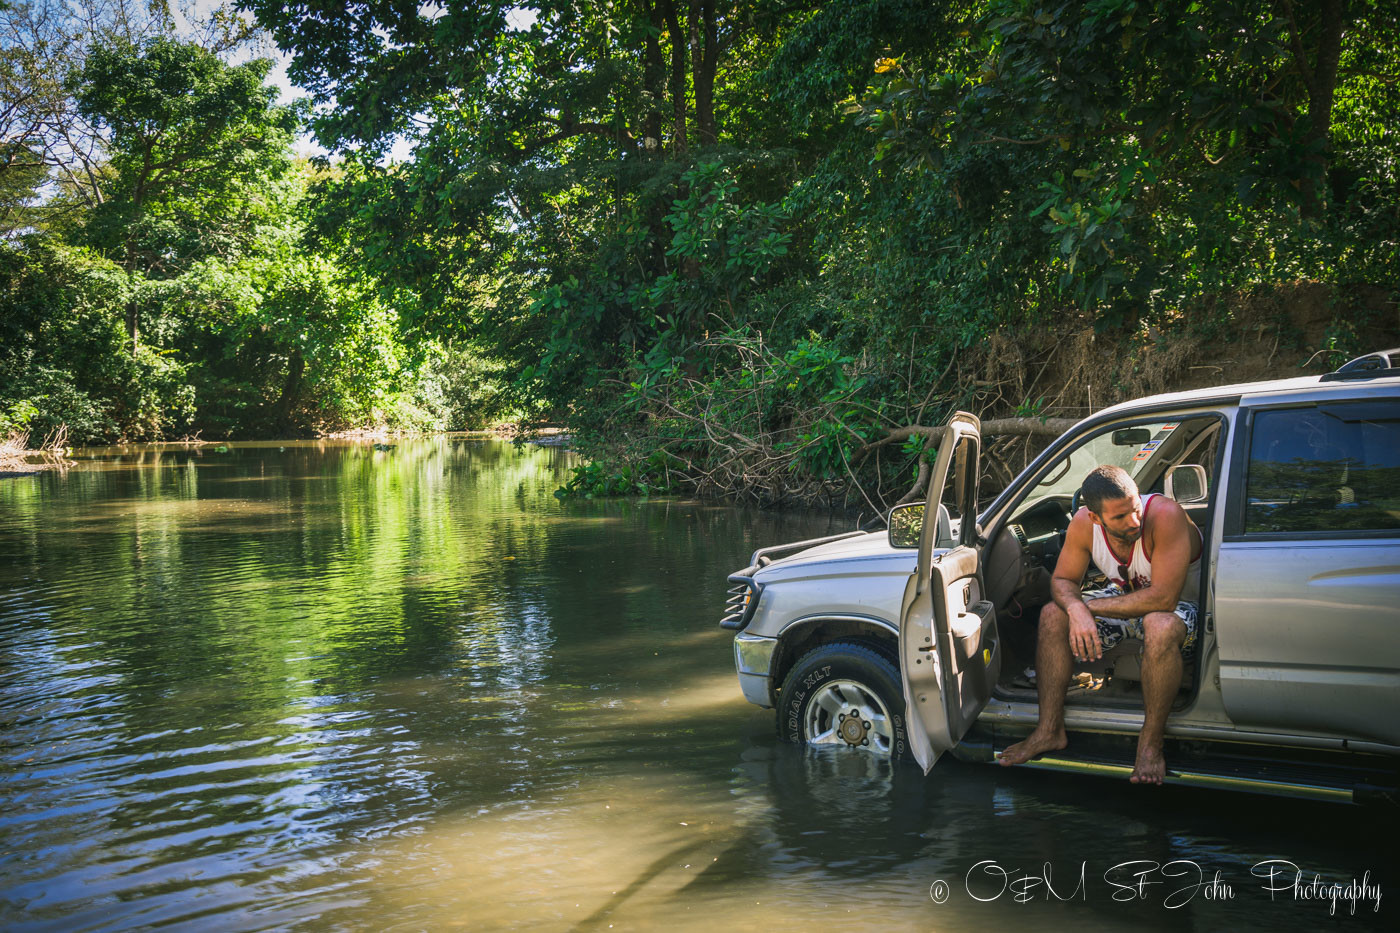 Driving in Costa Rica can be a bit challenging at times